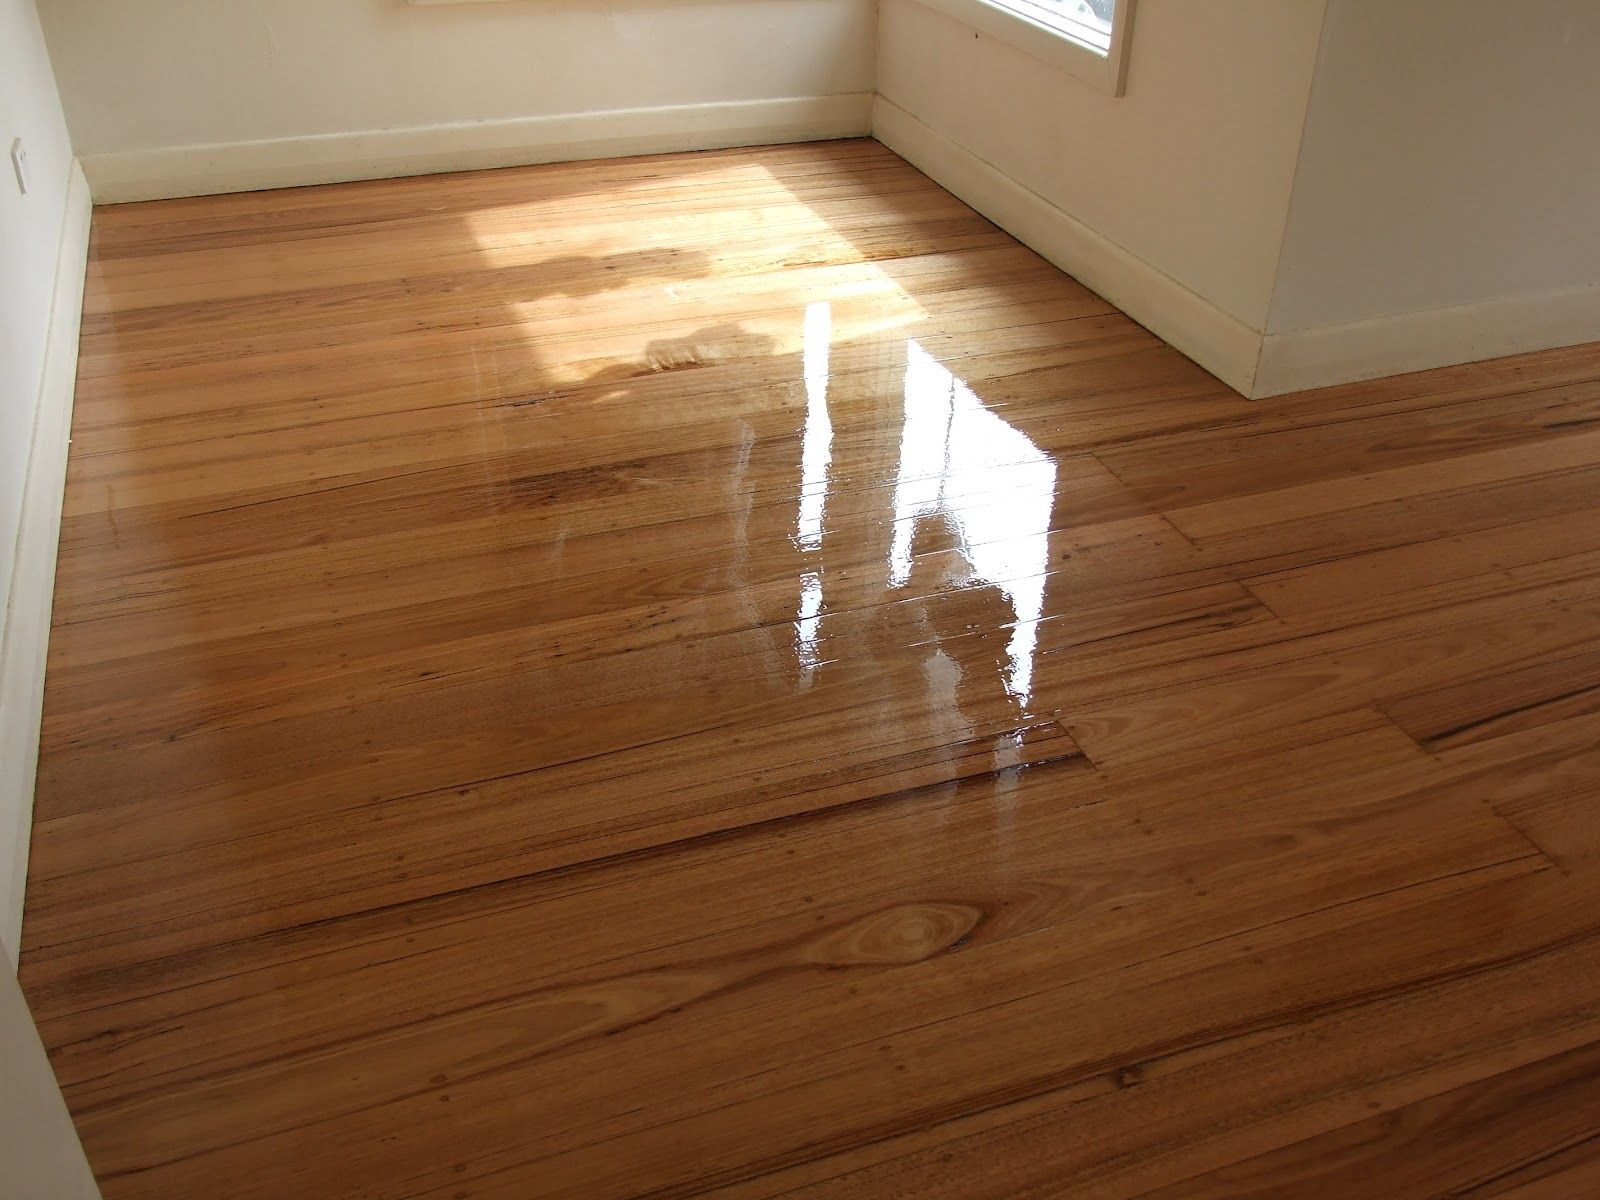 22 Wonderful Hardwood Flooring Bangor Maine 2024 free download hardwood flooring bangor maine of hardwood floors vs carpet floor regarding hardwood floors vs carpet pro tect s finished floor guard is quickly be ing one of